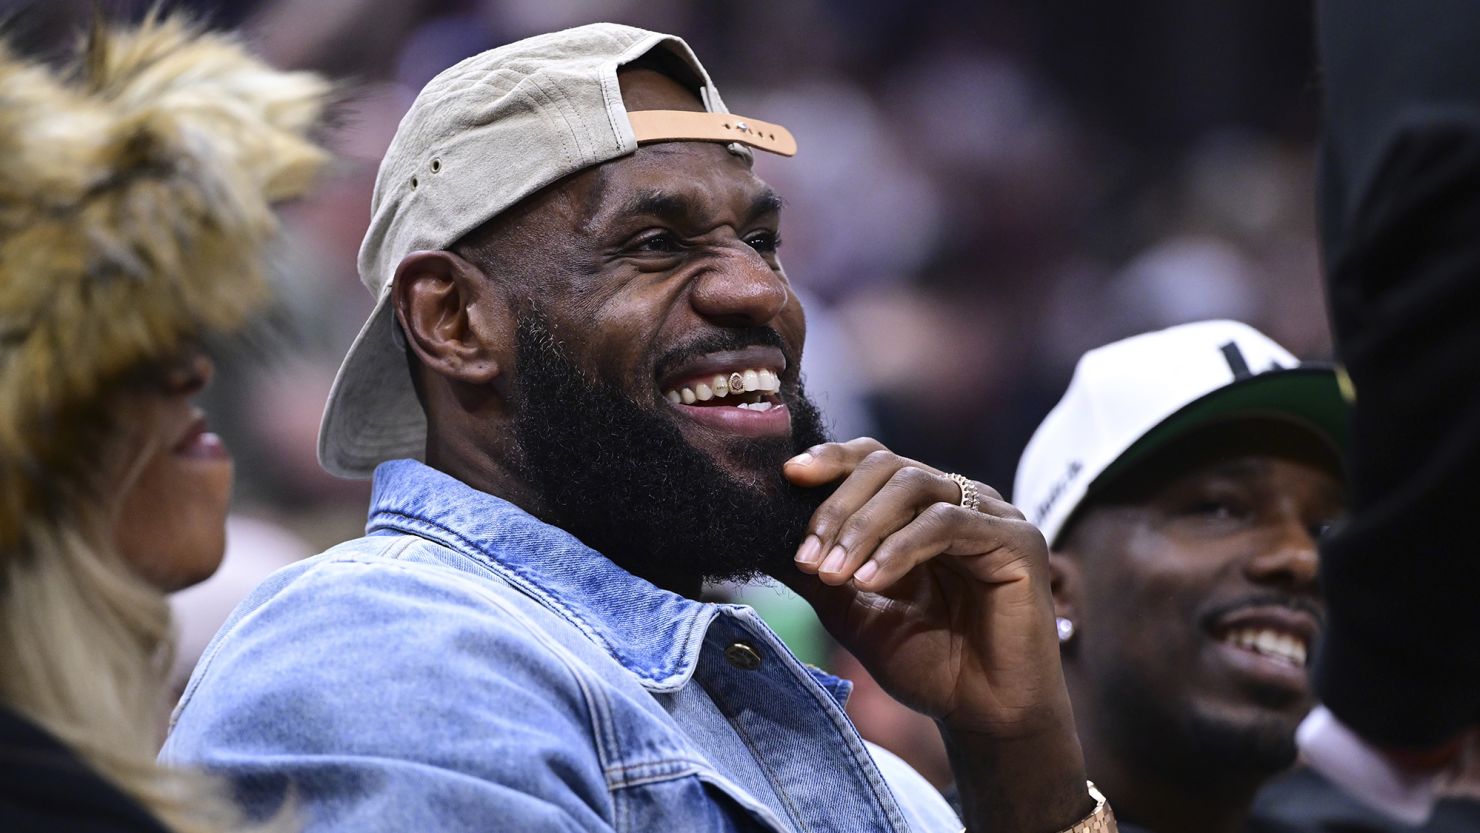 LeBron James was courtside to watch his old Cleveland Cavaliers team.